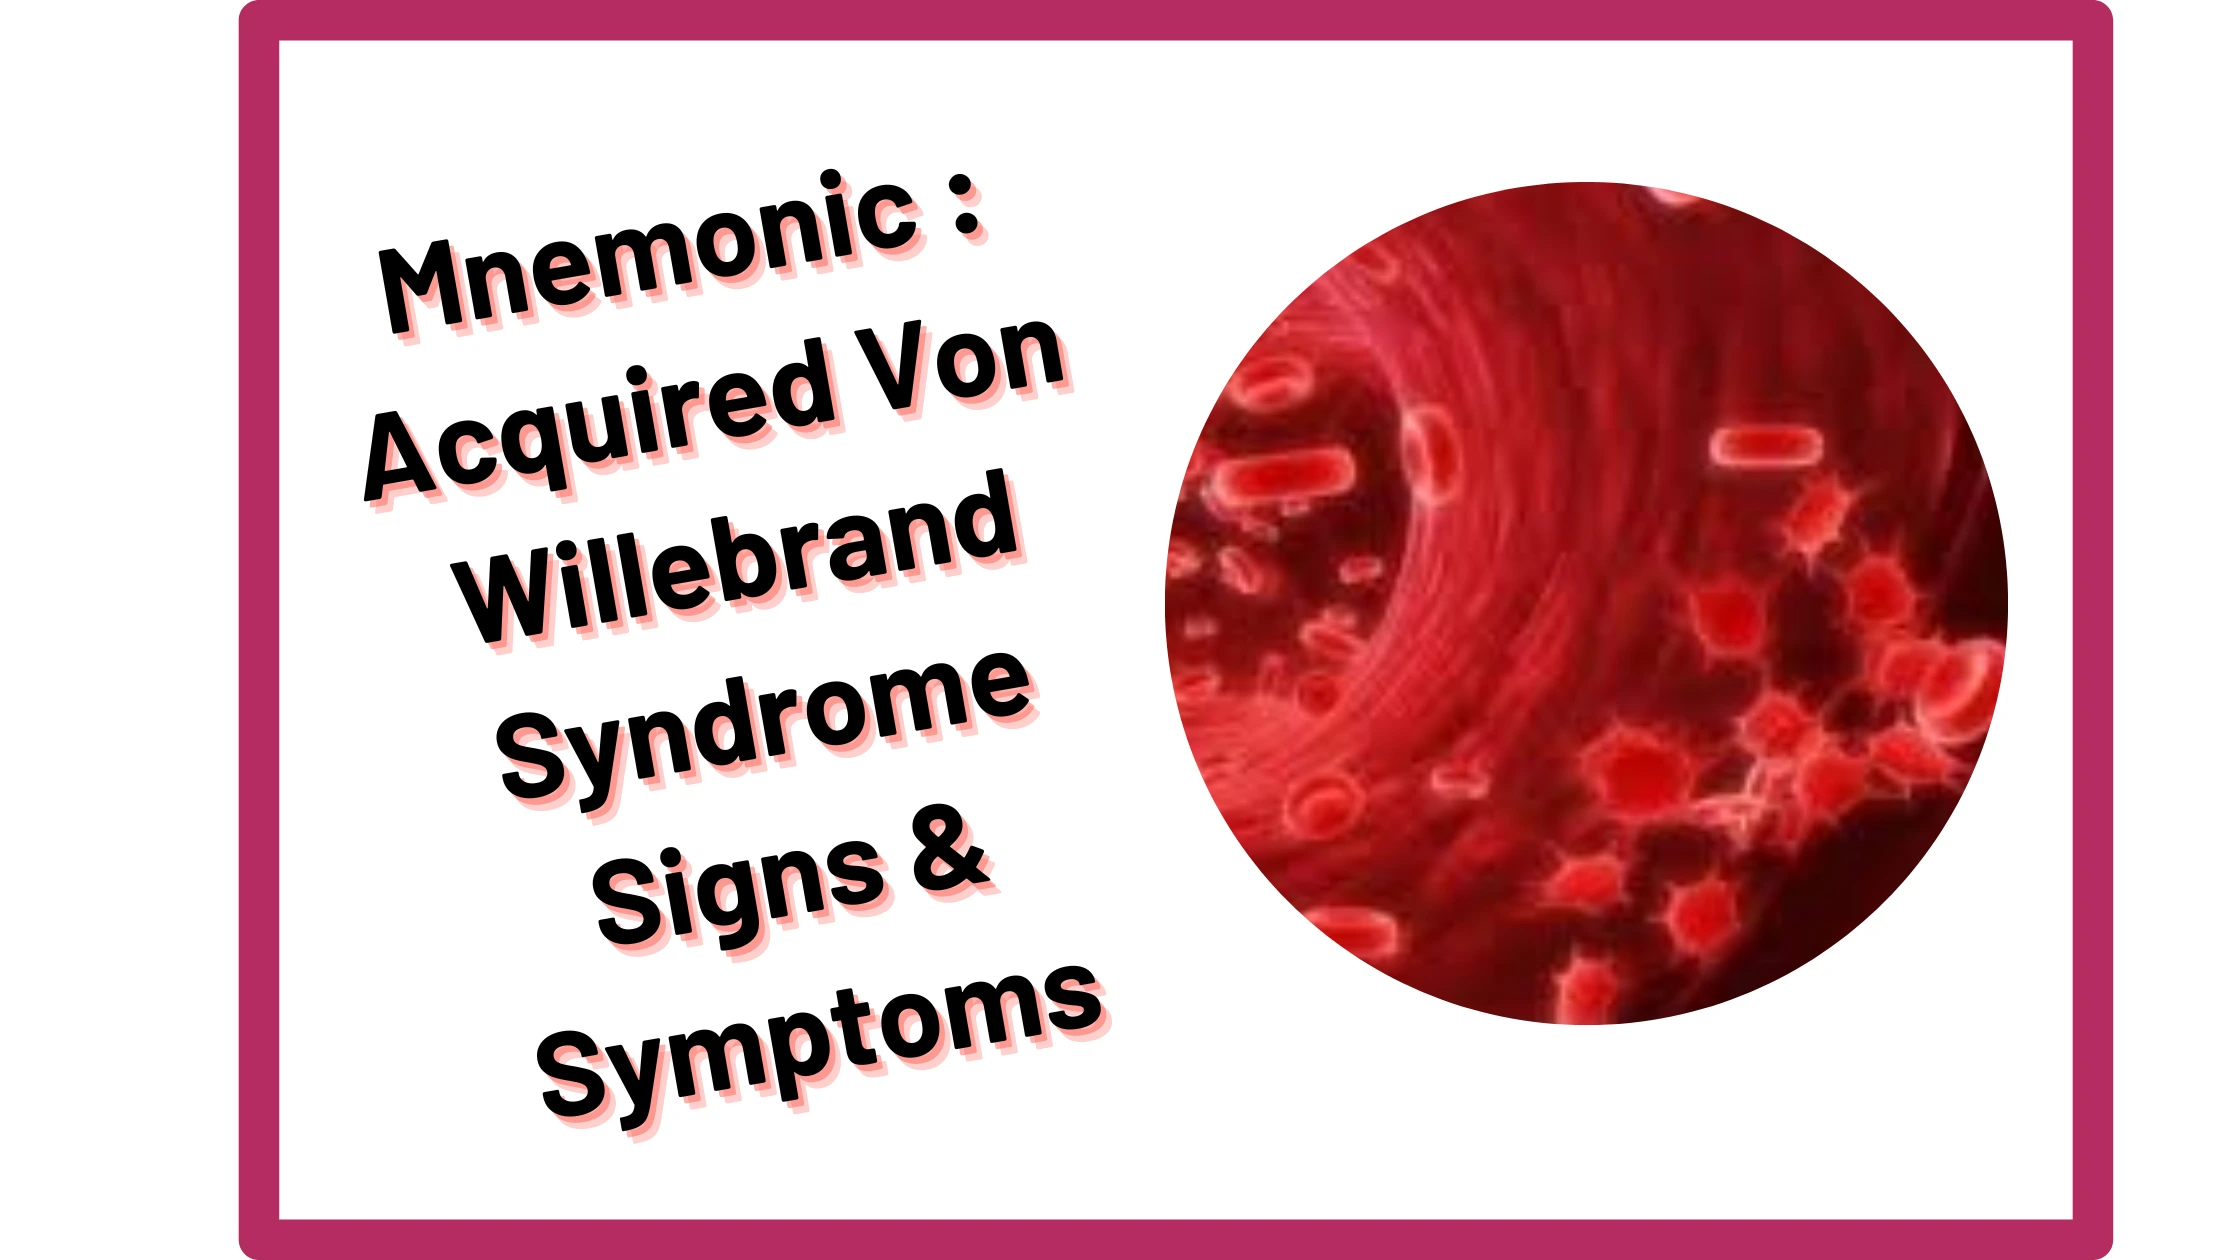 You are currently viewing [Very Cool] Mnemonic : Acquired Von Willebrand Syndrome Signs & Symptoms